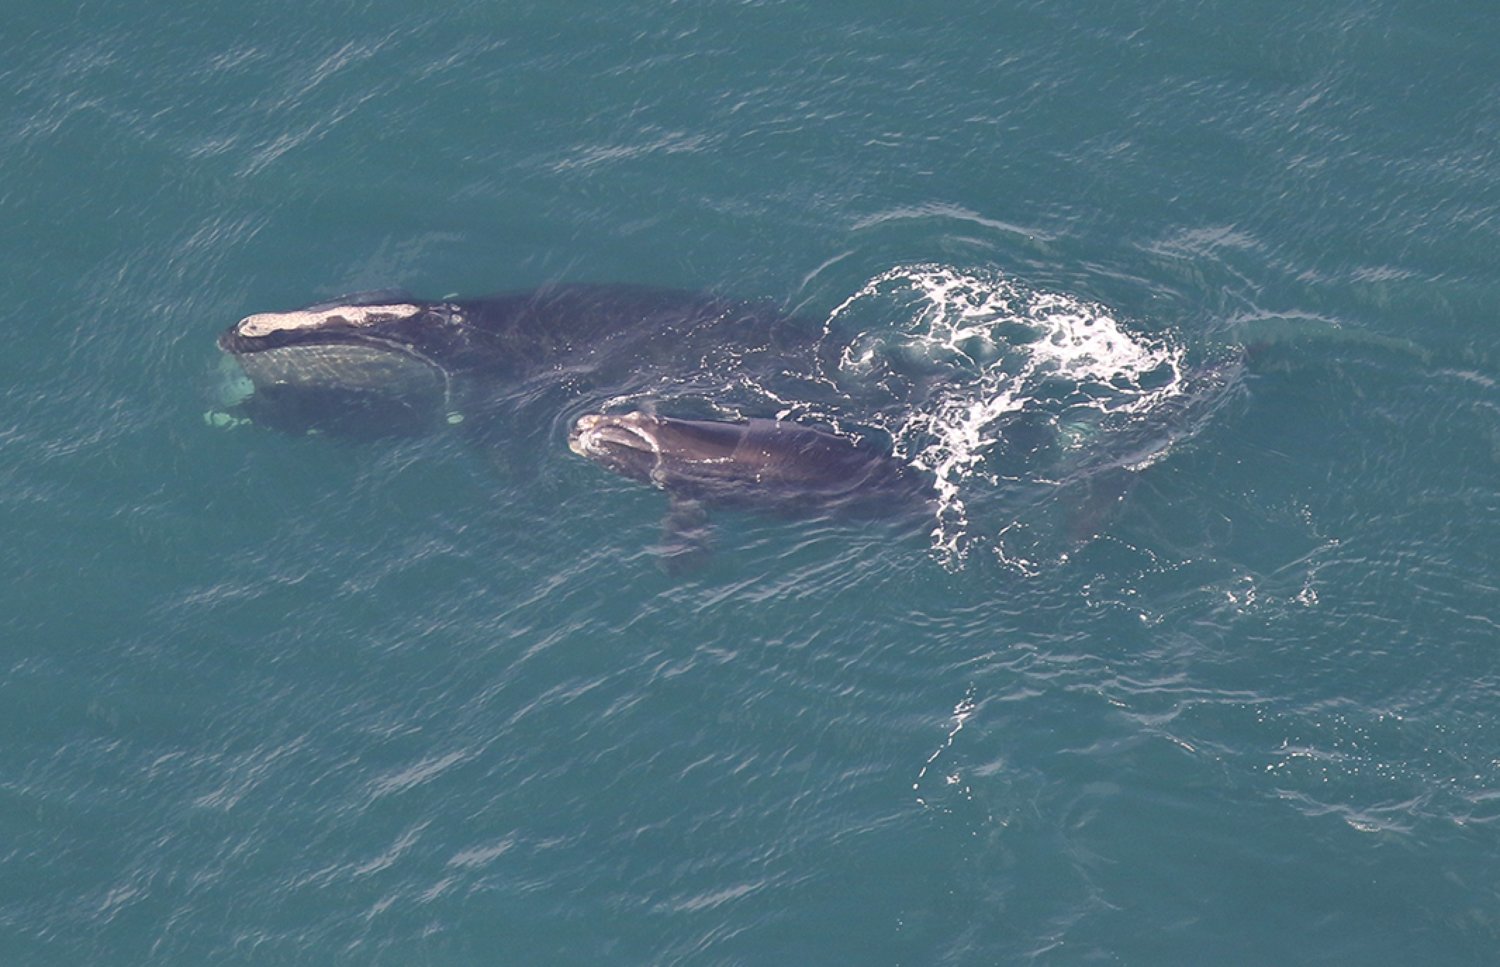 The North Atlantic right whale Porcia and her 2023 calf.